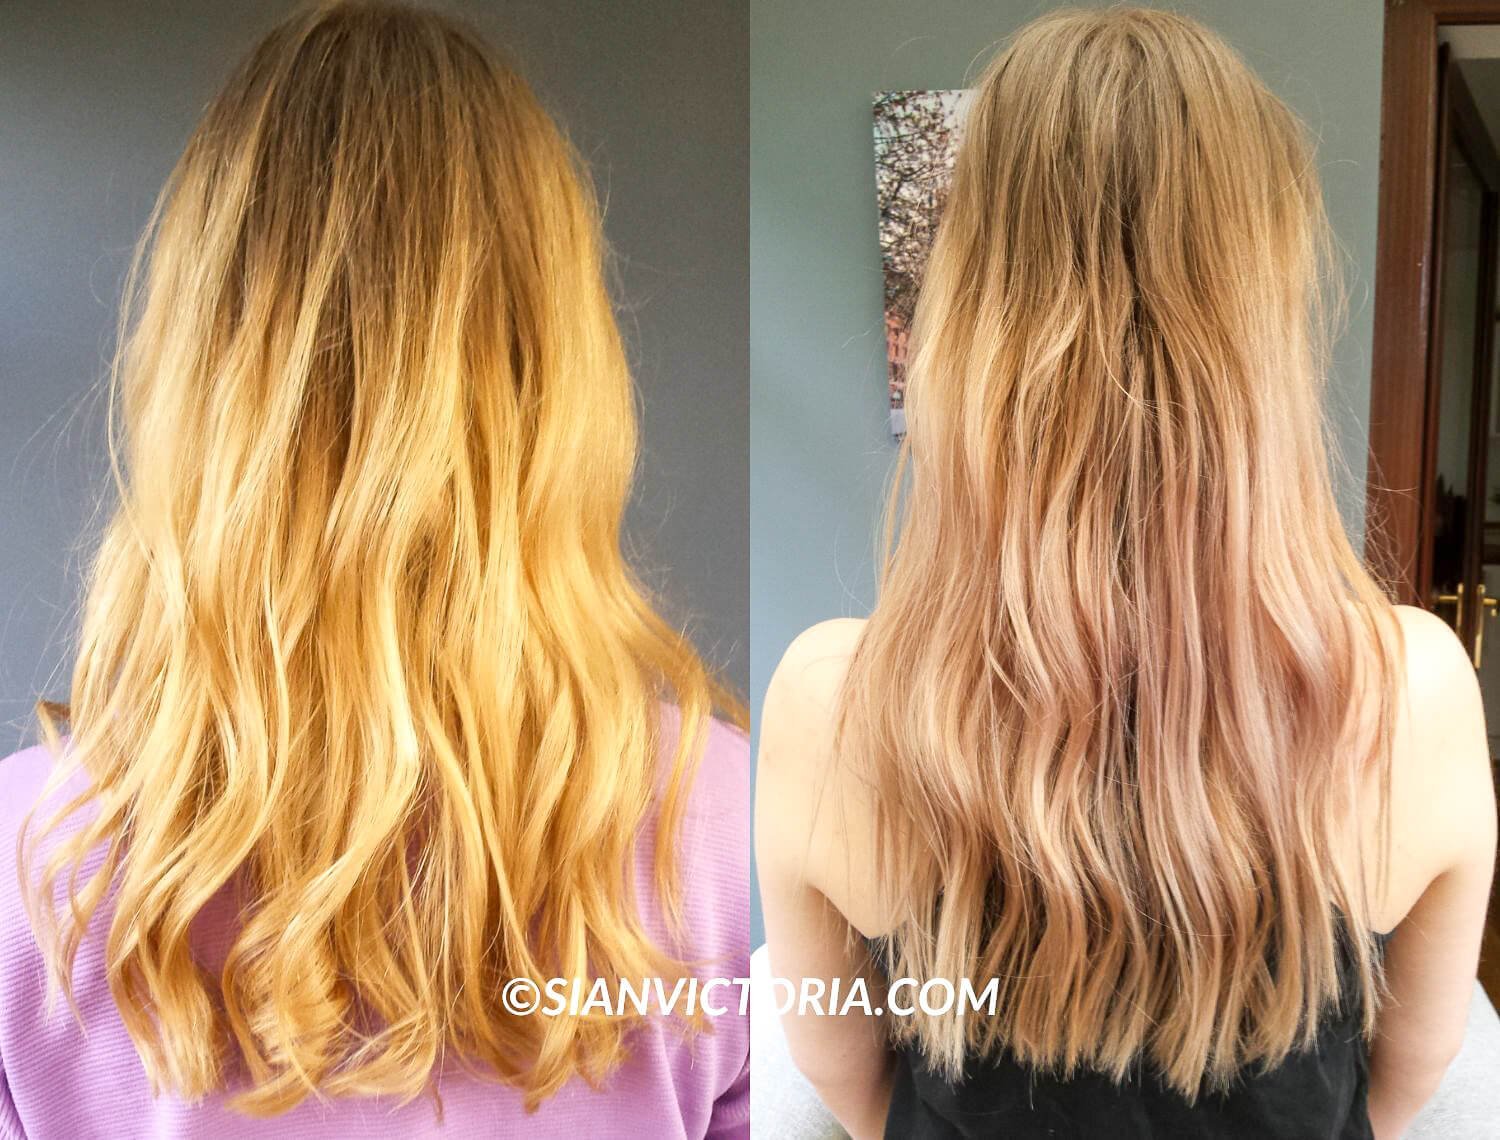 Before & After Purple Toner: How To Get Rid Of Brassy Blonde Hair